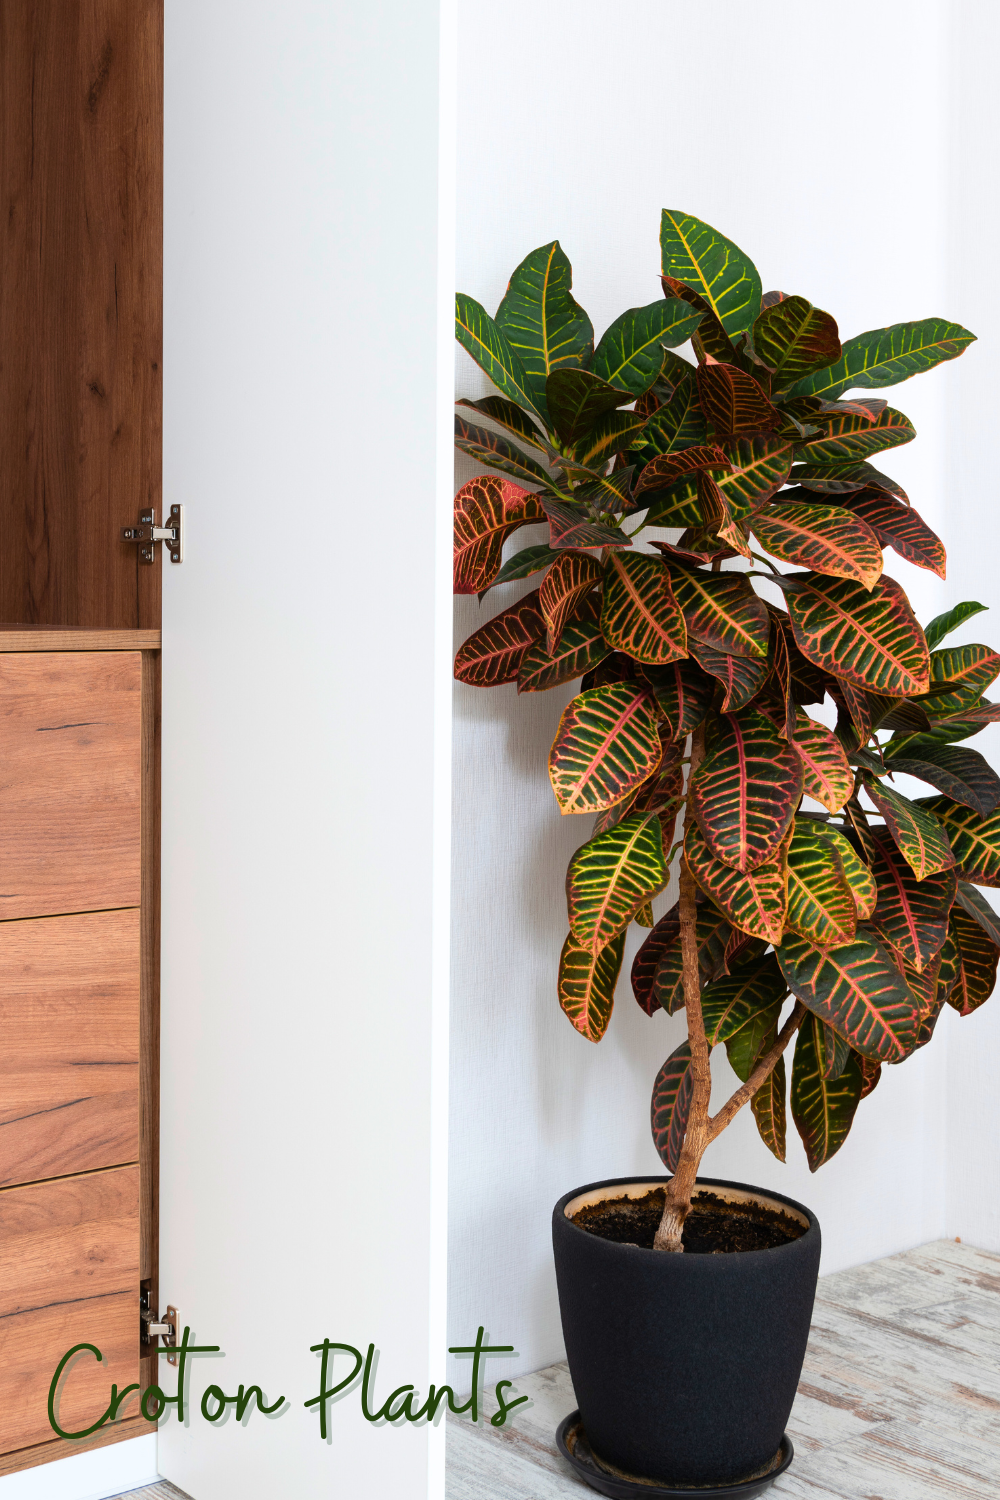 A picture of a croton plant growing in a bathroom.